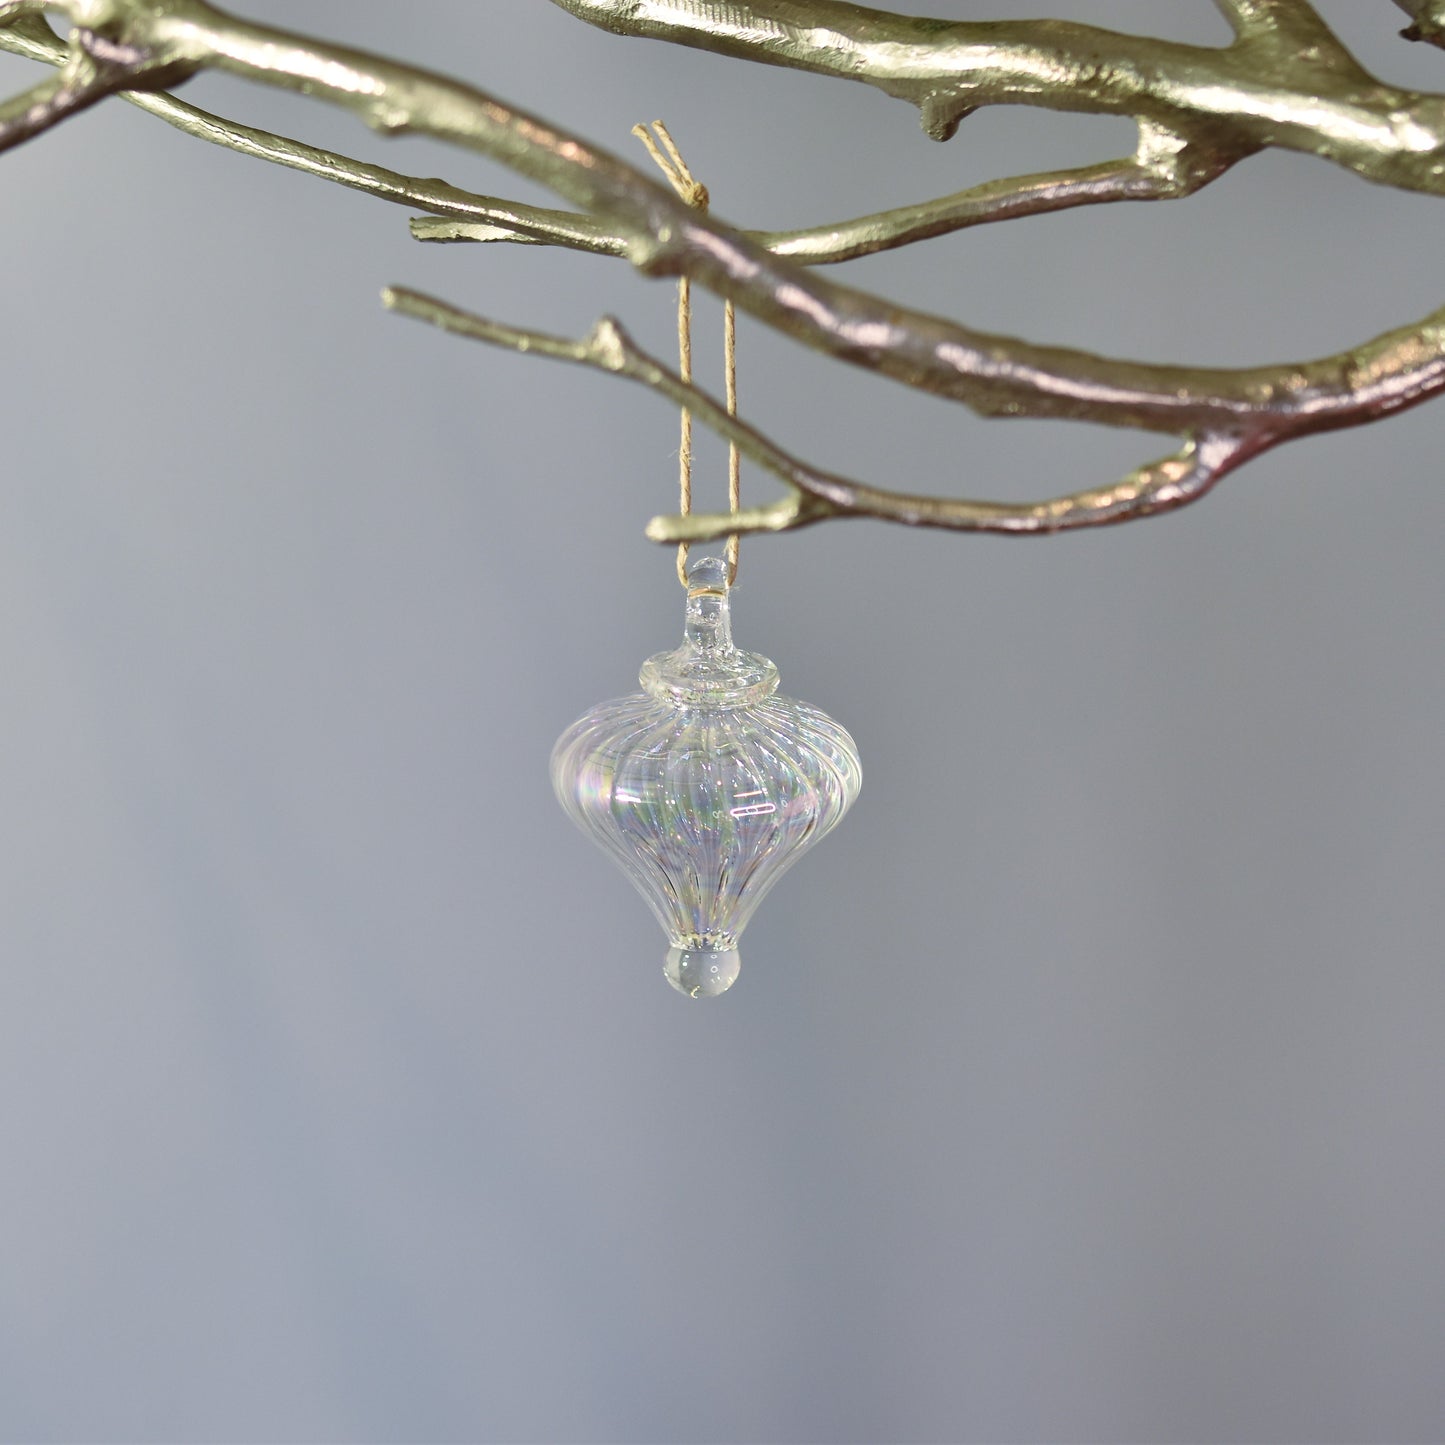 Victorian Lantern - Egyptian Glass Bauble - Clear Iridescent - Small